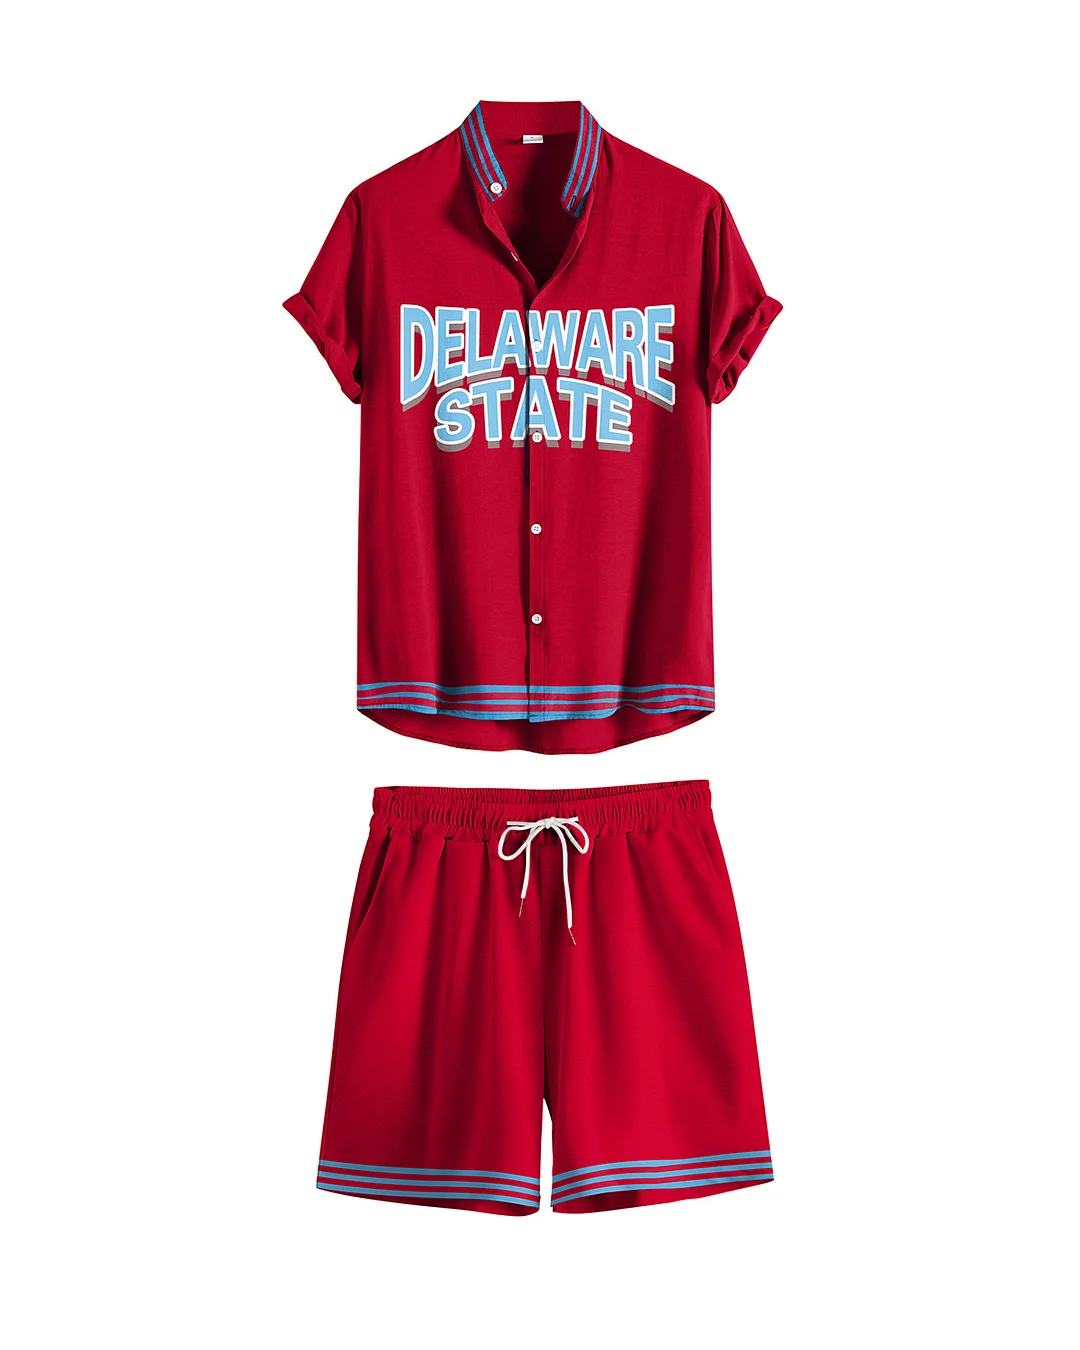 Delaware State Two Piece Set